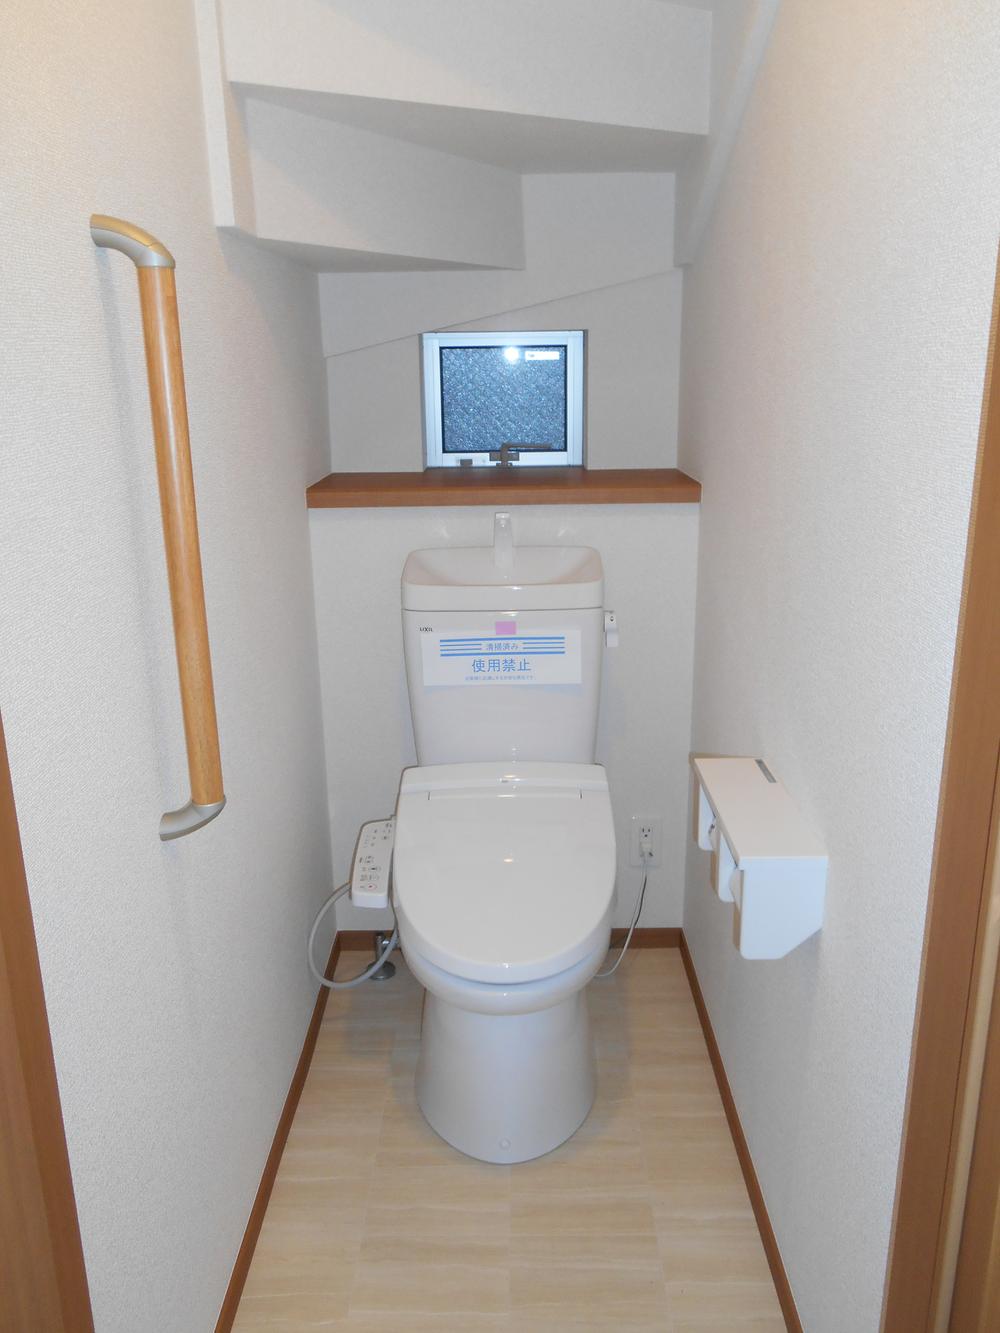 Toilet. Building 2: located under the stairs